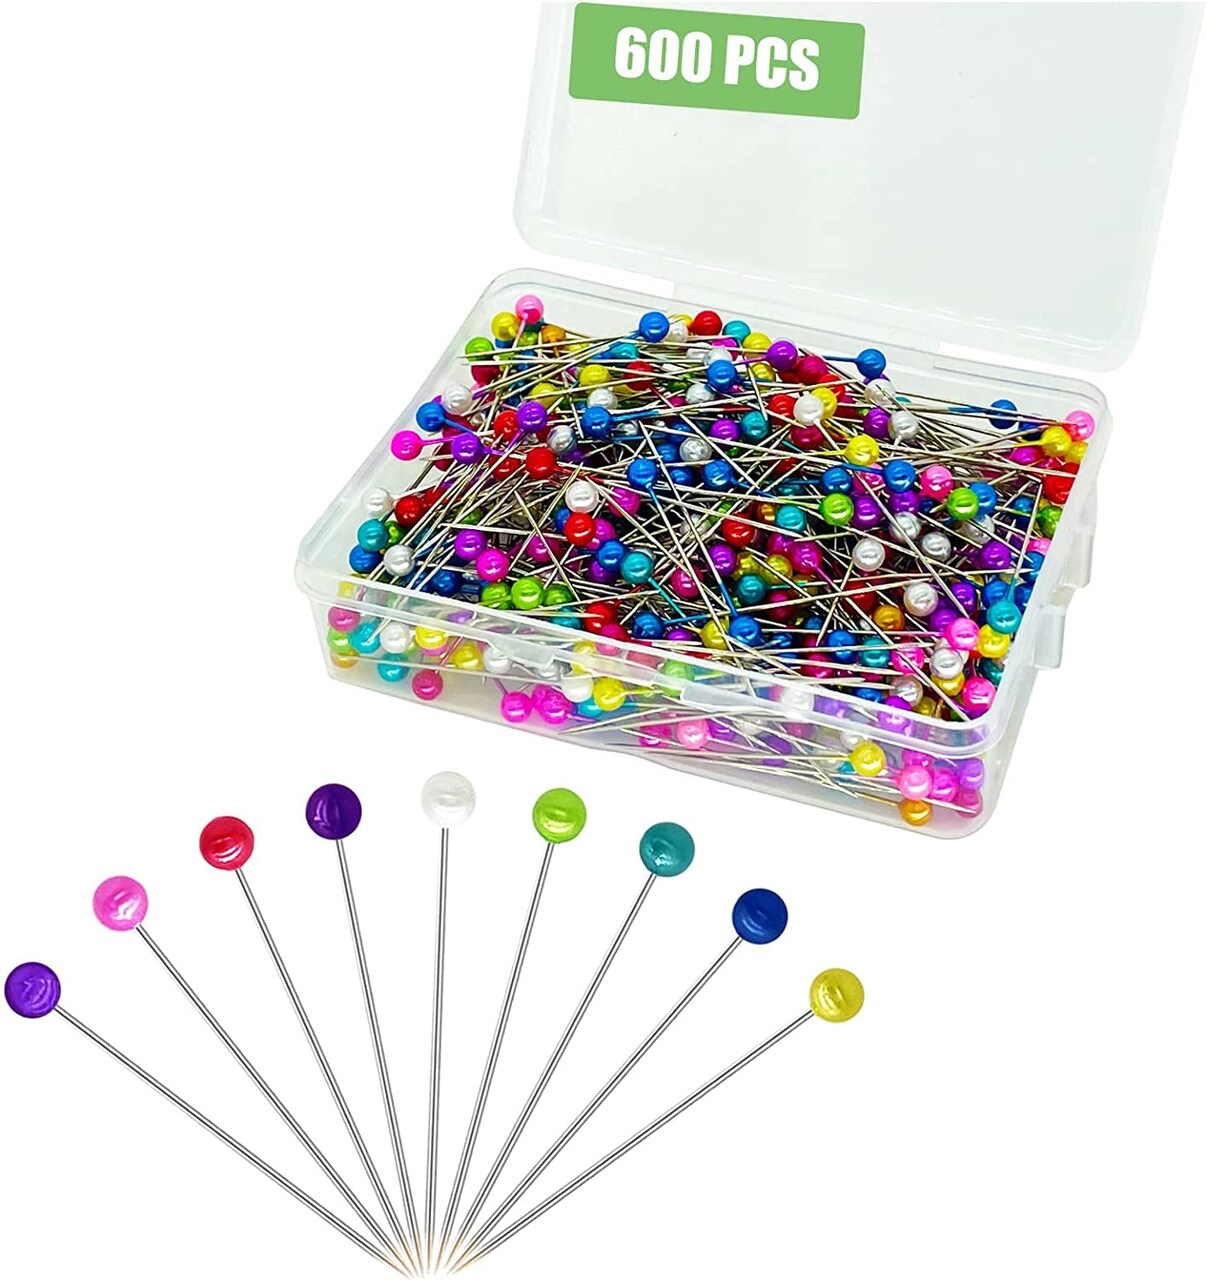 Sewing Pins Straight Pin for Fabric, Pearlized Ball Head Quilting Pins Long  1.5Inch, Multicolor Corsage Stick Pins for Dressmaker, Jewelry DIY  Decoration, Craft and Sewing Project